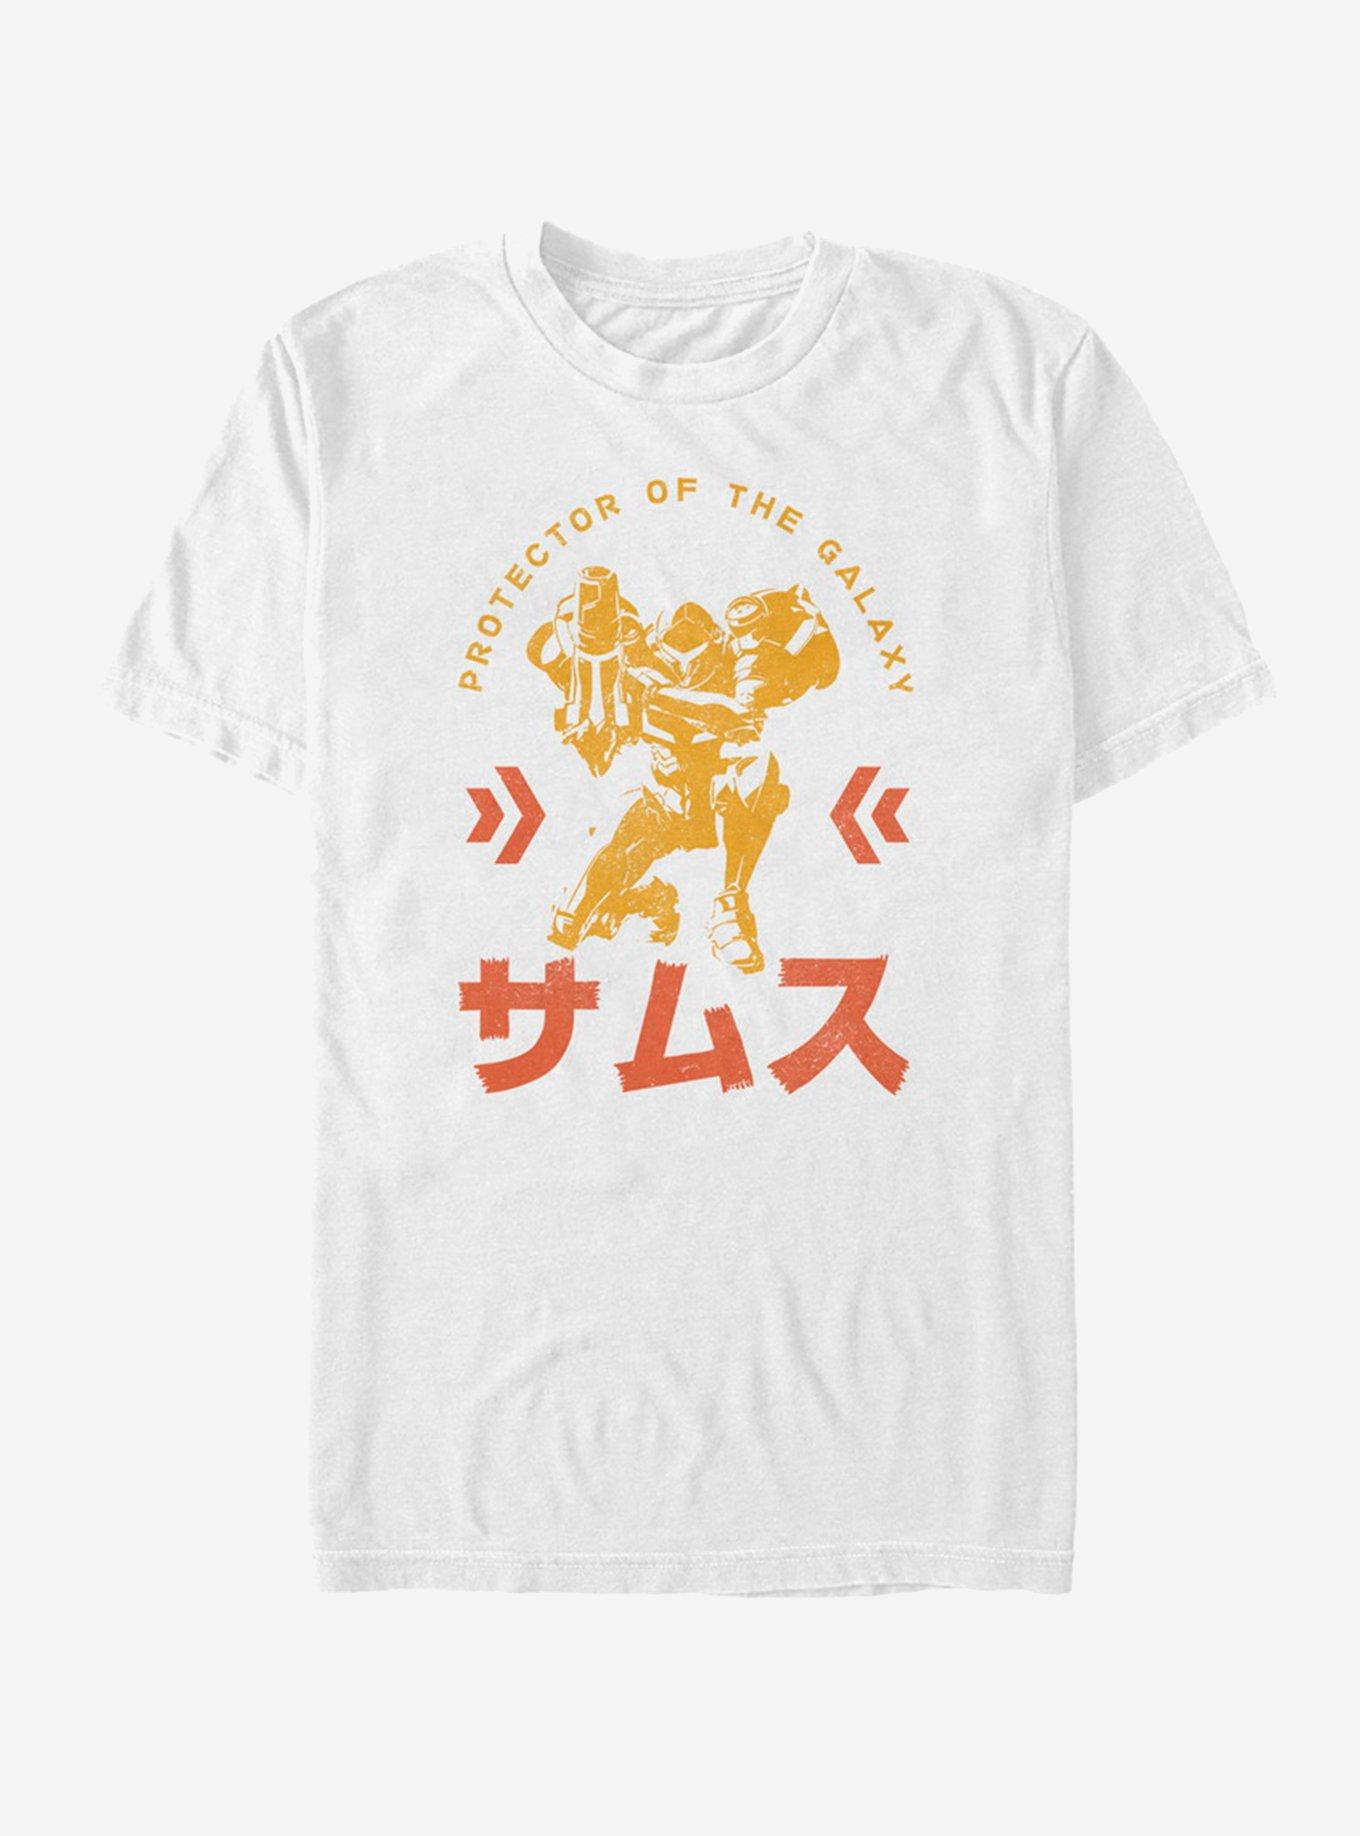 Nintendo Protector Of The Galaxy T-Shirt, WHITE, hi-res